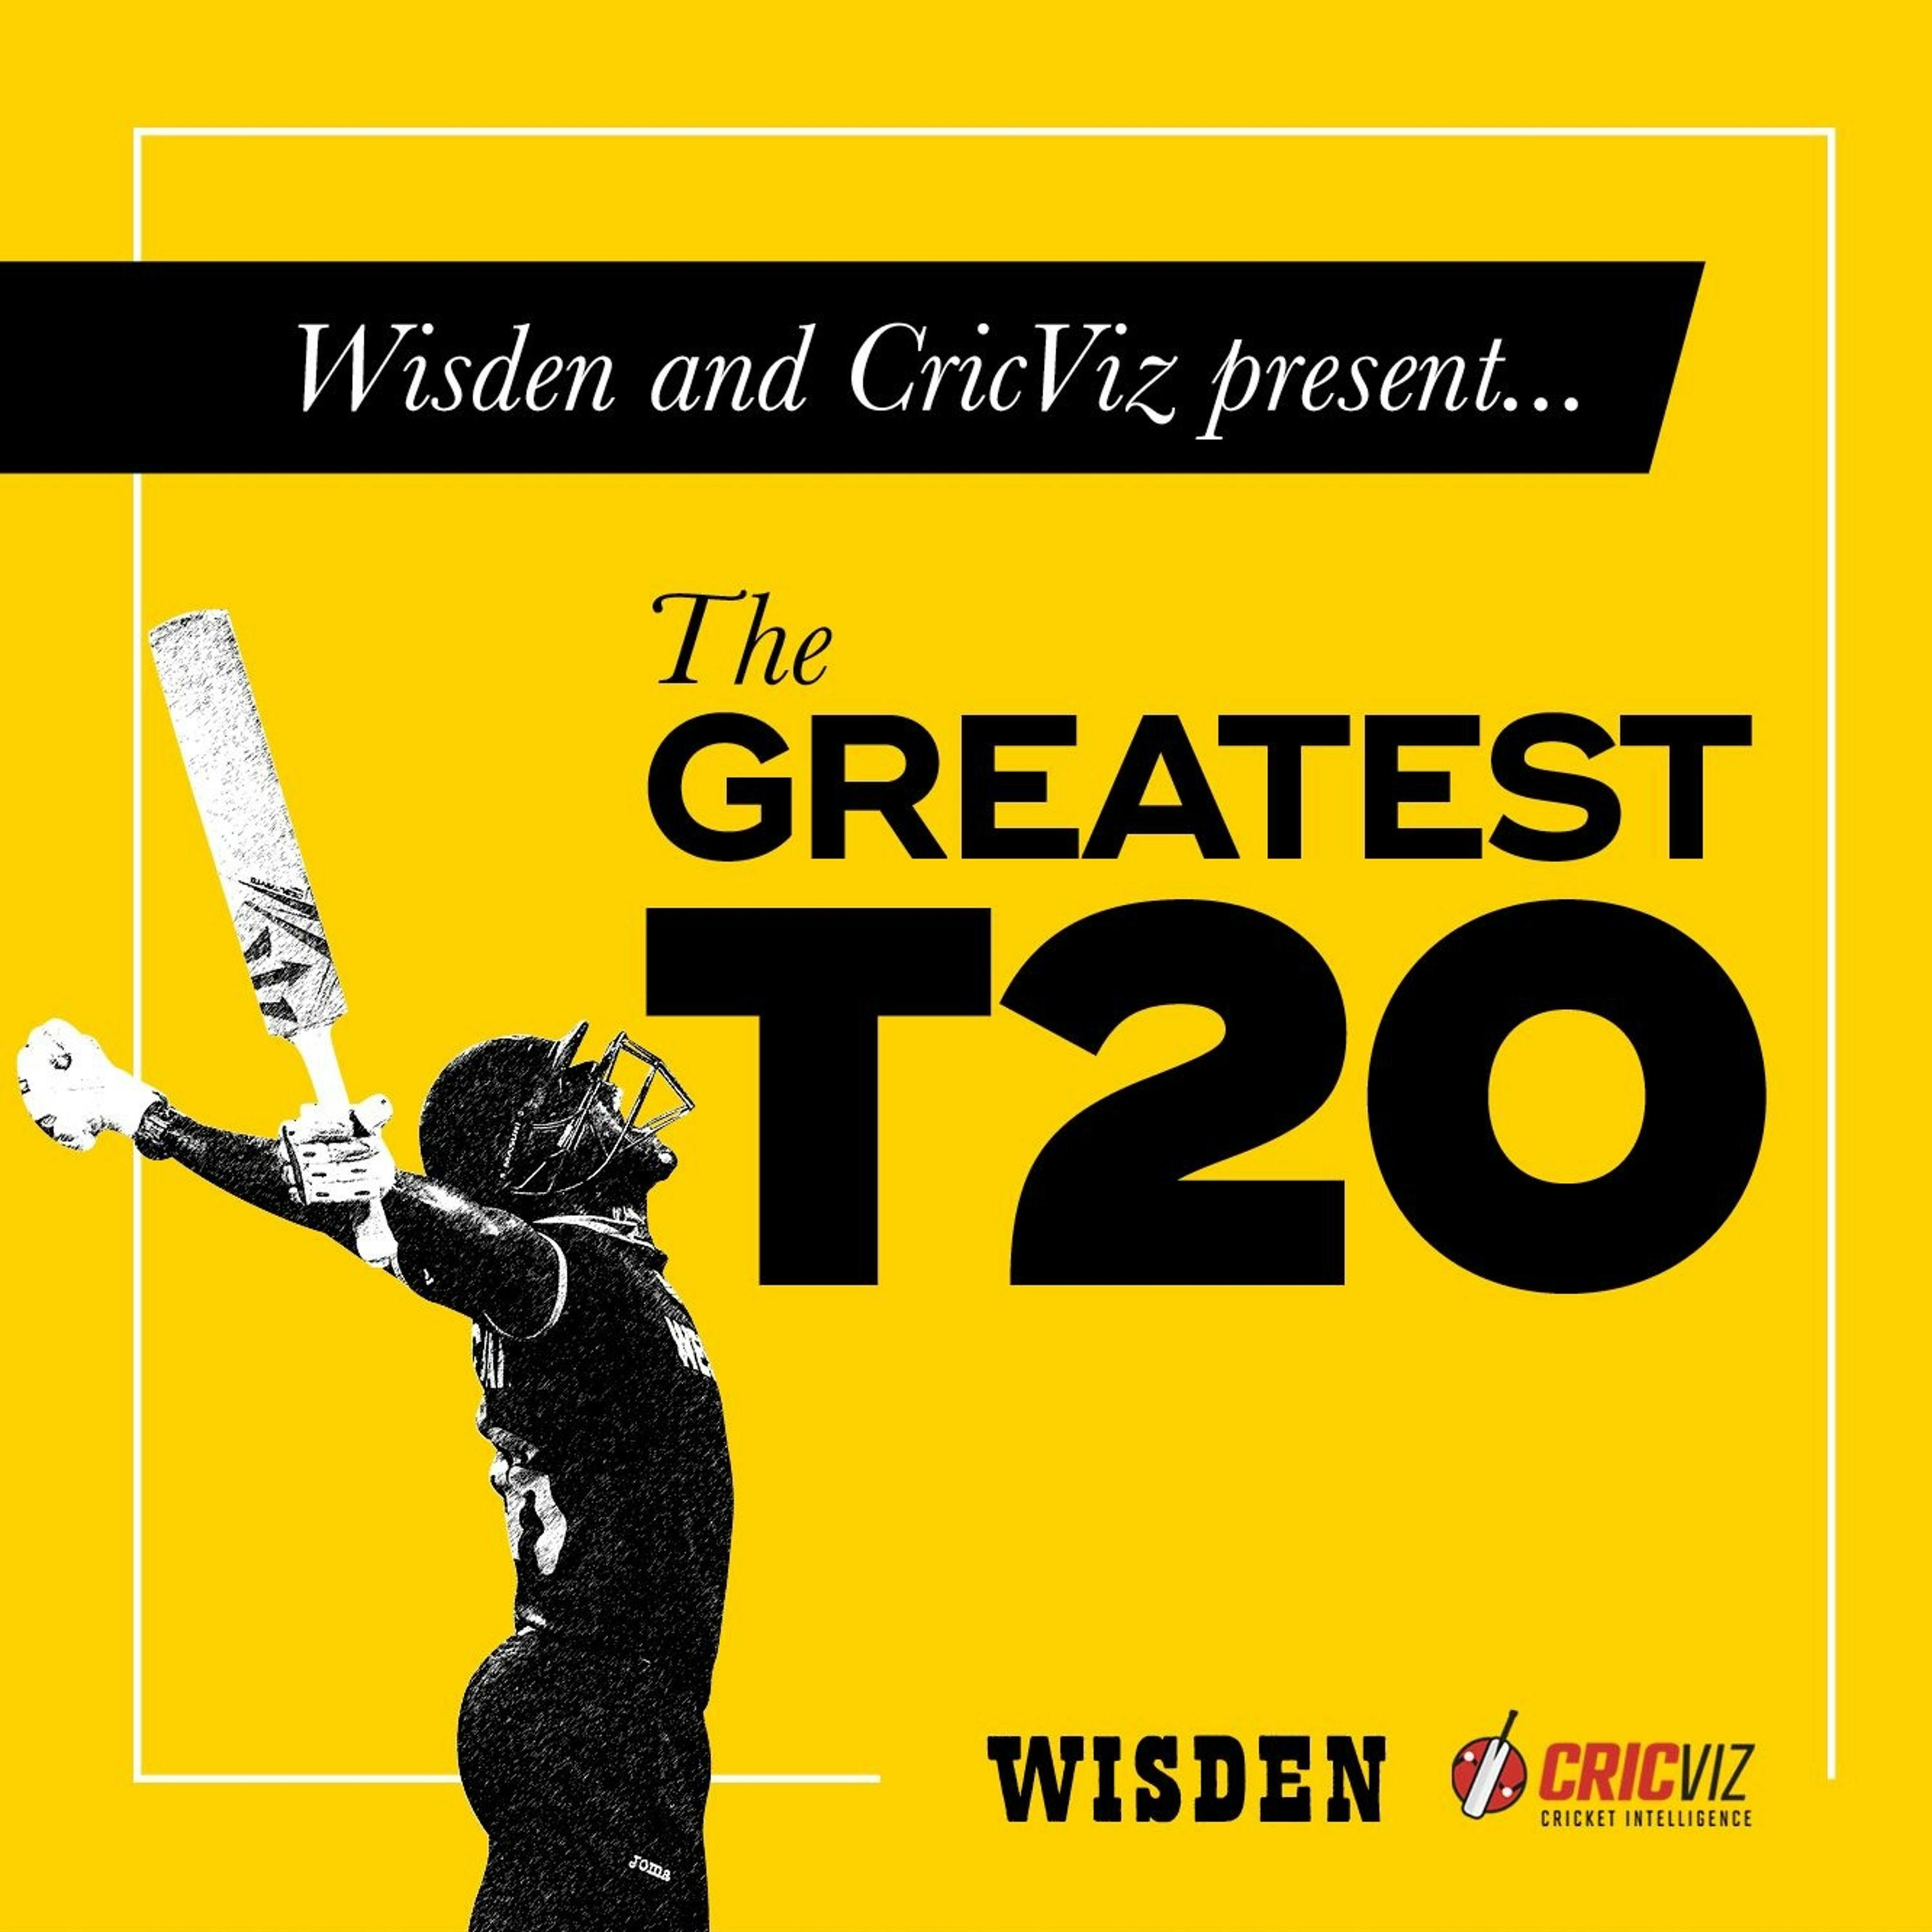 Wisden and CricViz present...The Greatest T20: Who is the greatest T20 influencer?